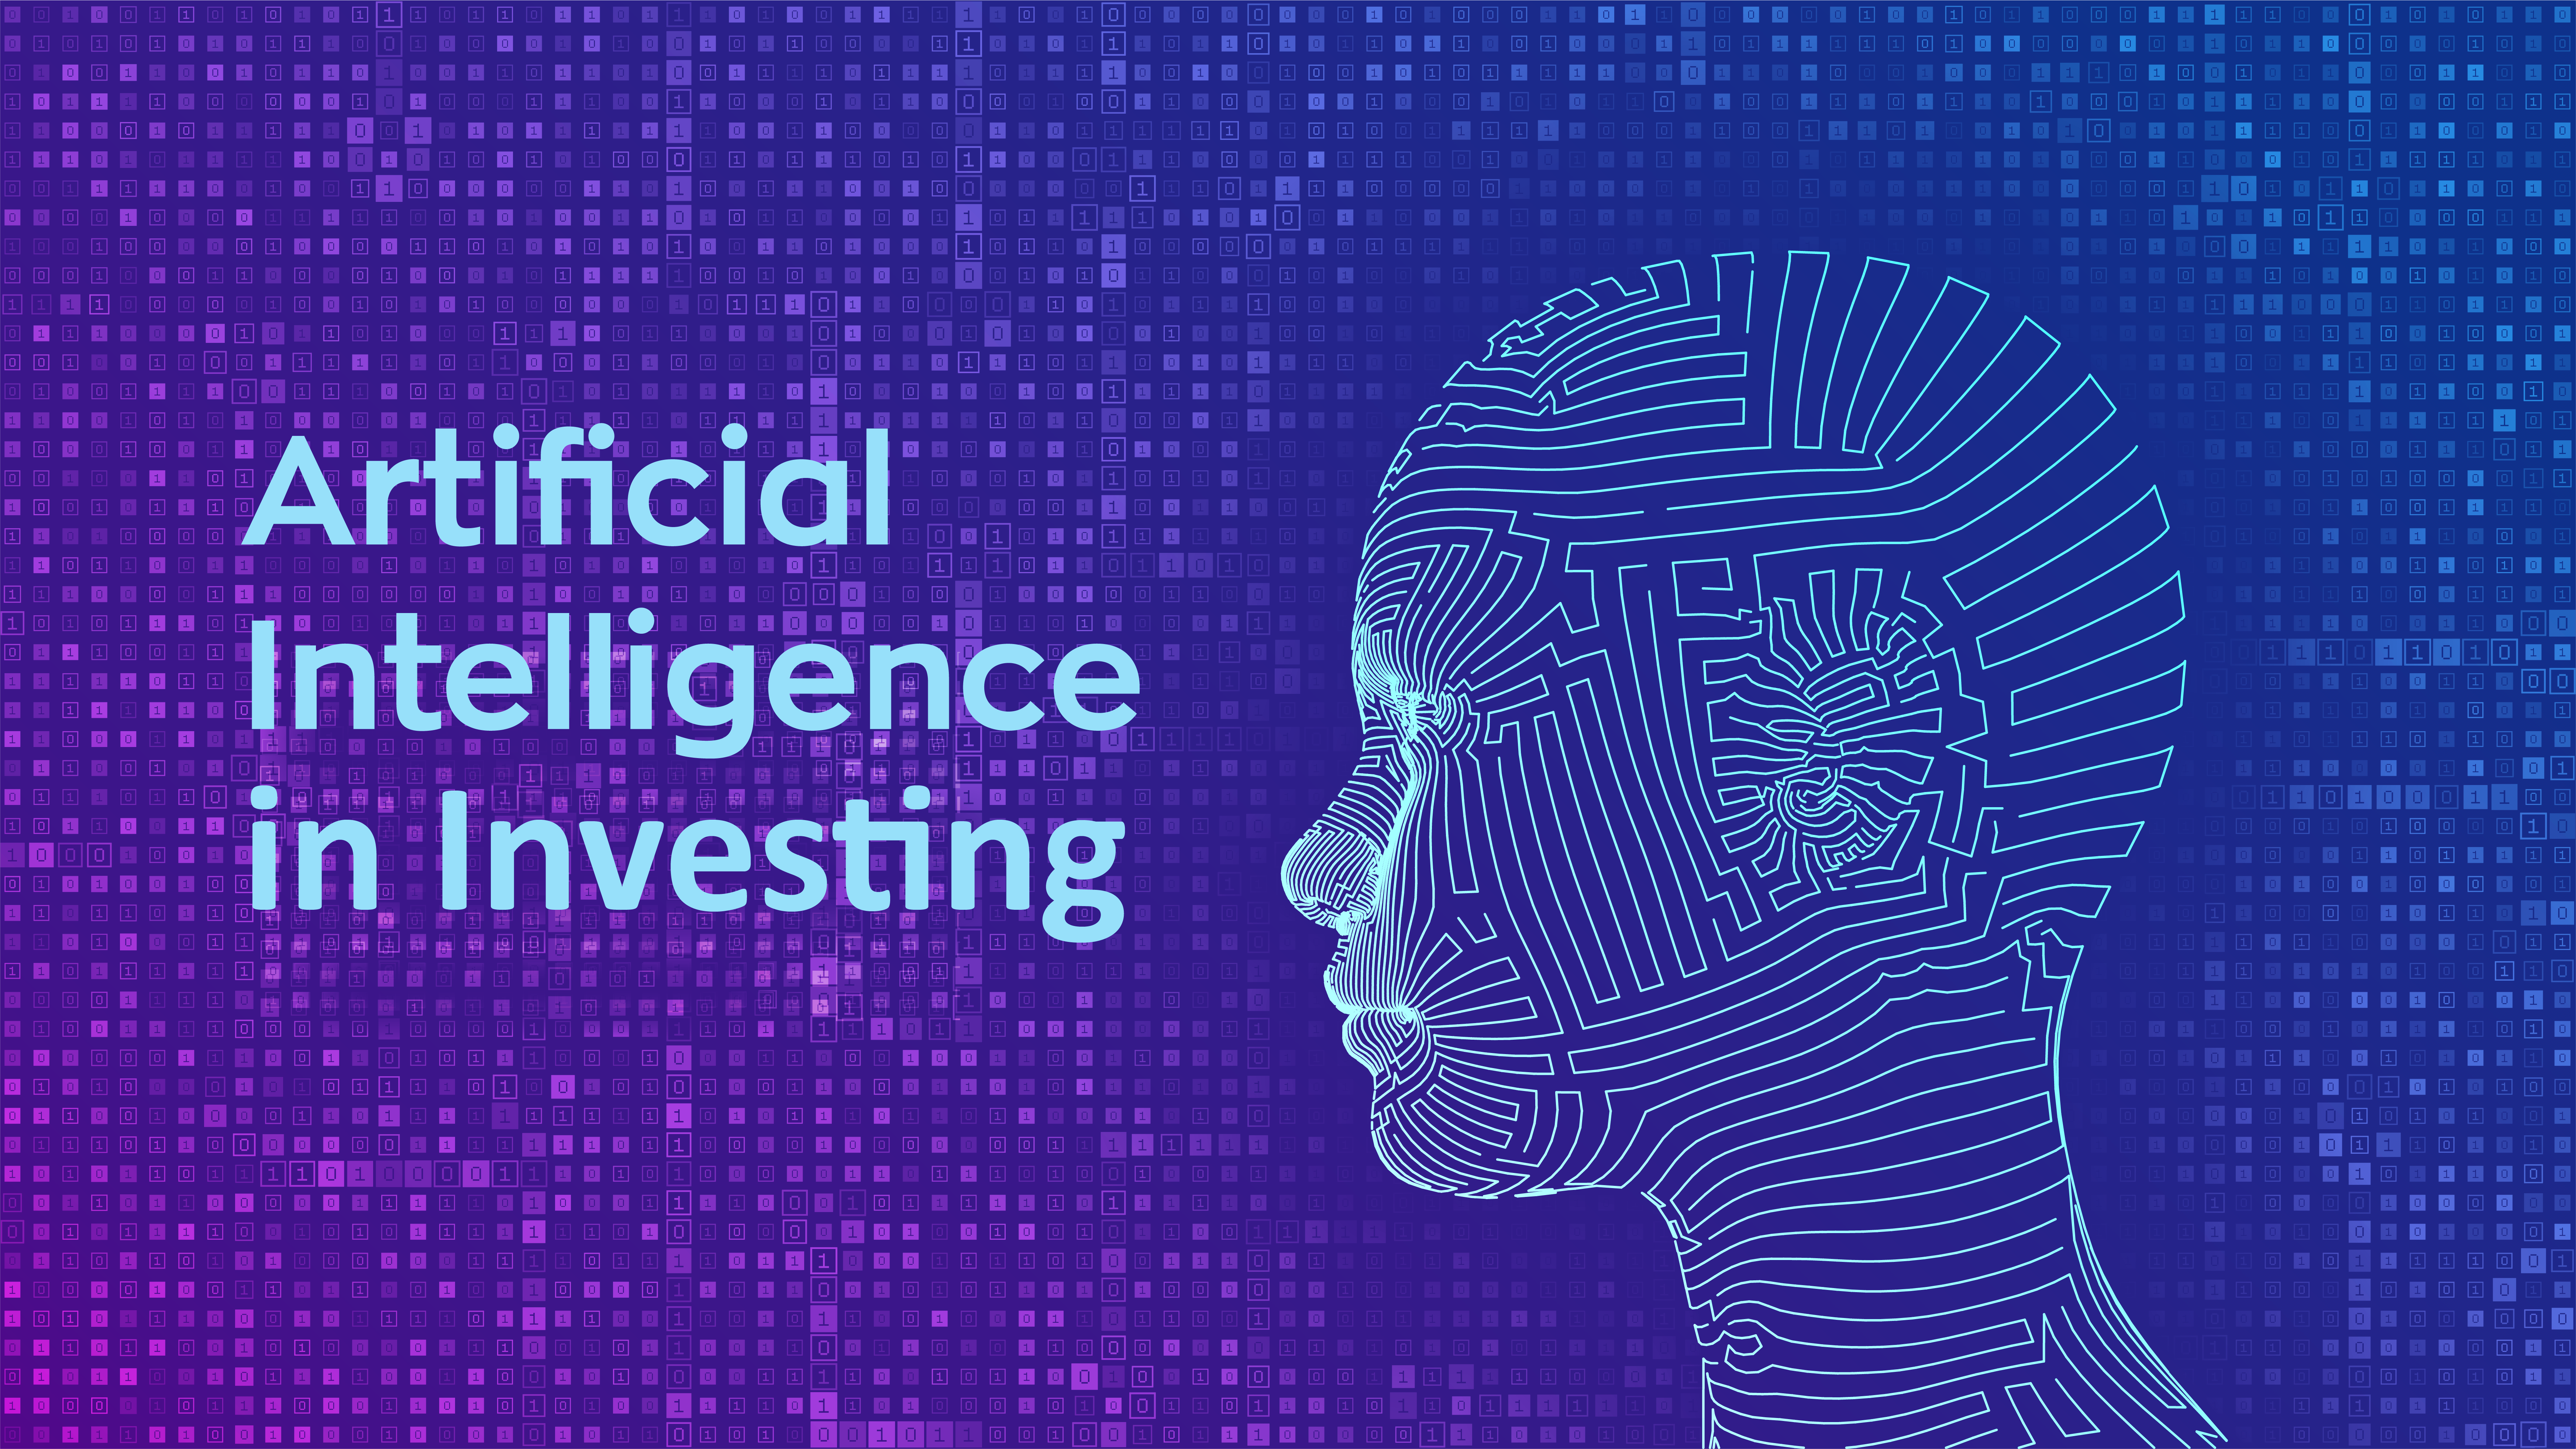 Role of artificial intelligence in investing and advisory services